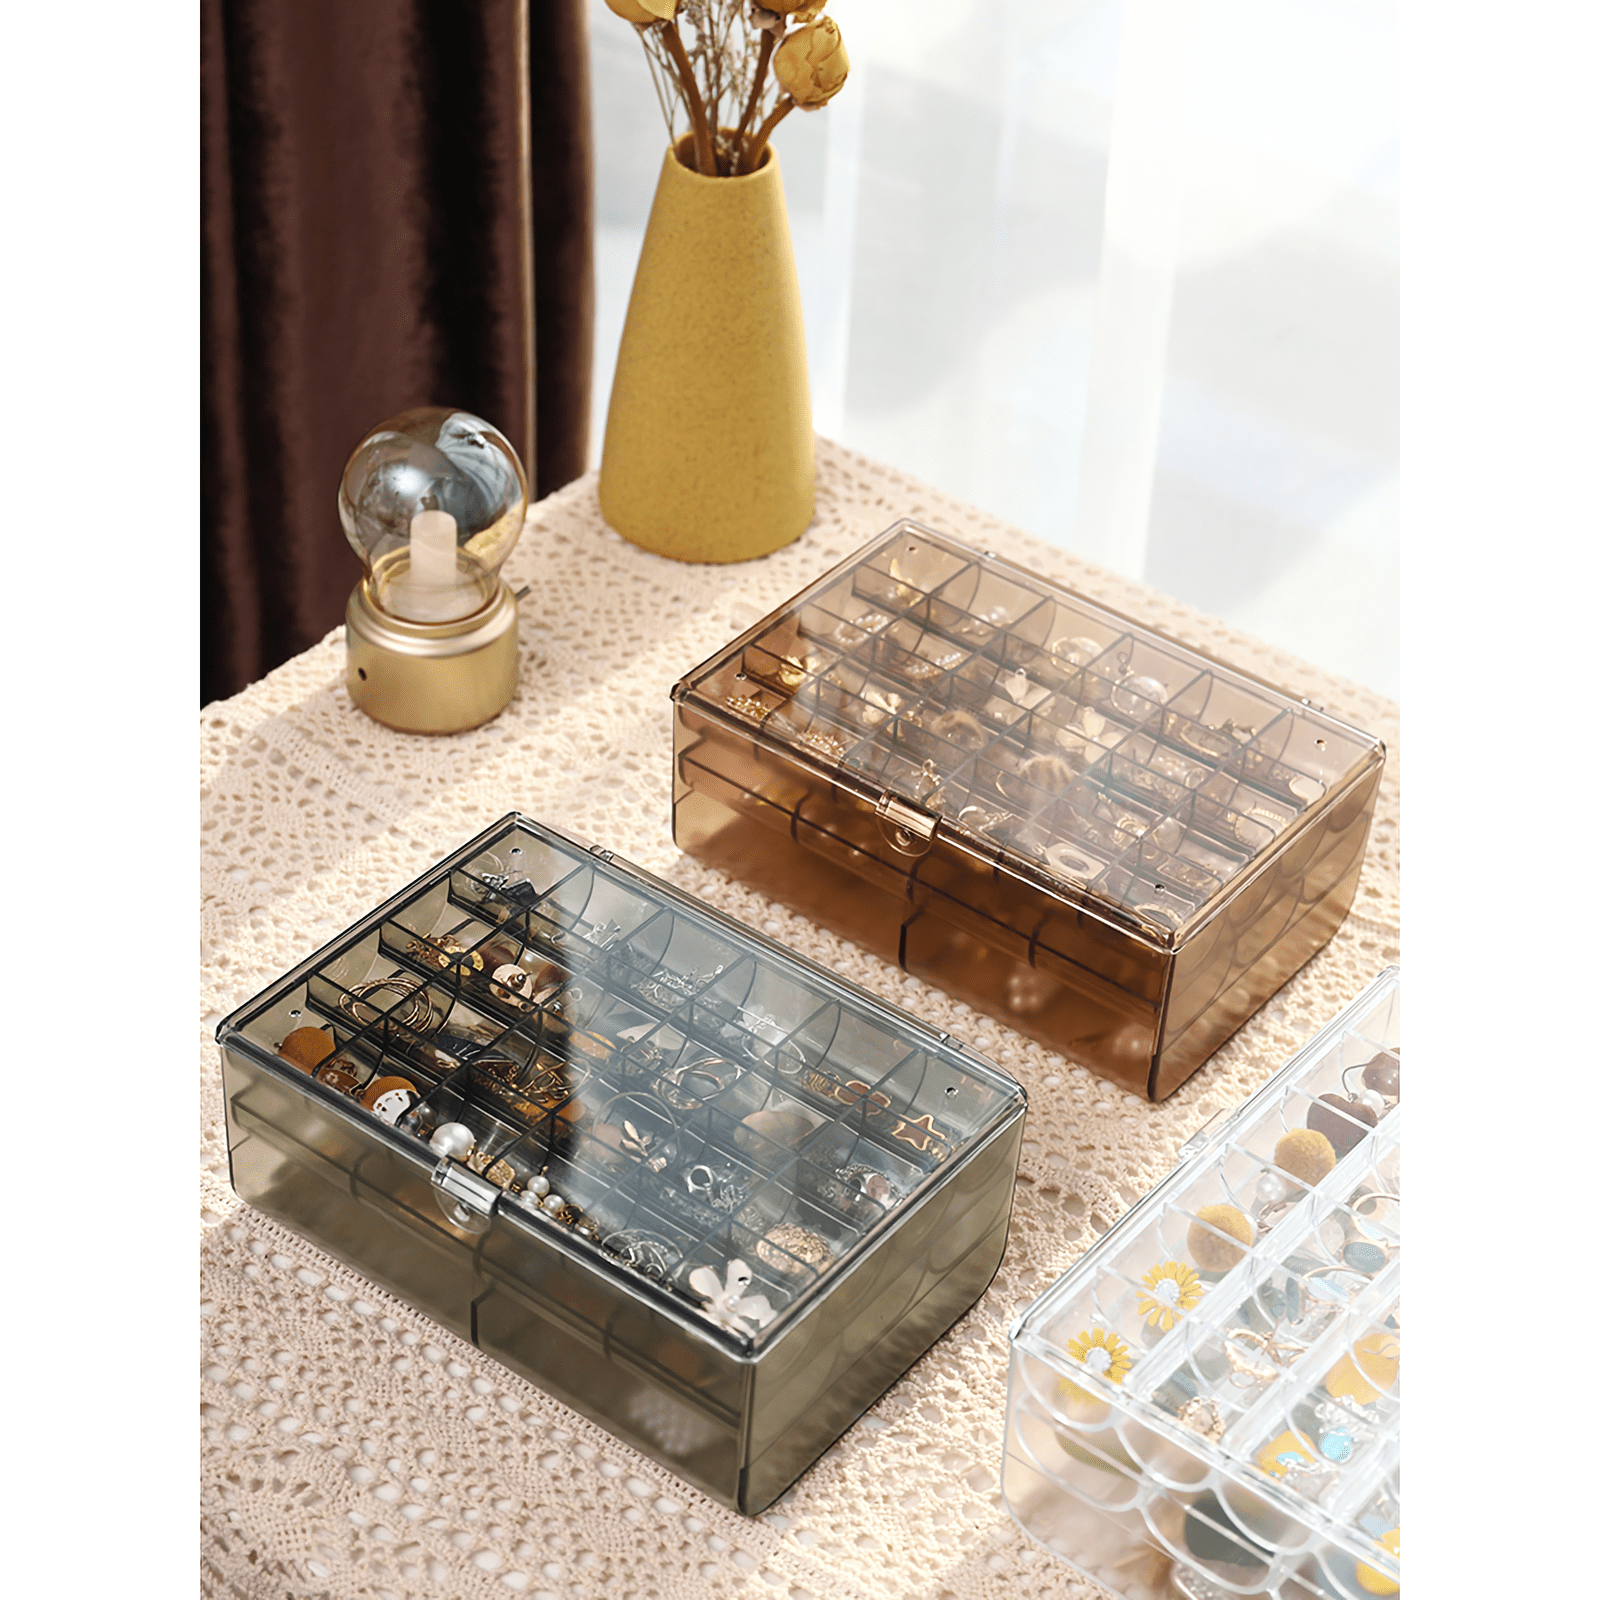 Yapicoco Earring Organizer, Acrylic Jewelry Organizer Box for Earrings Storage, Acrylic Jewelry Box Holder with 38 Small Compartment Trays, 3-Layer